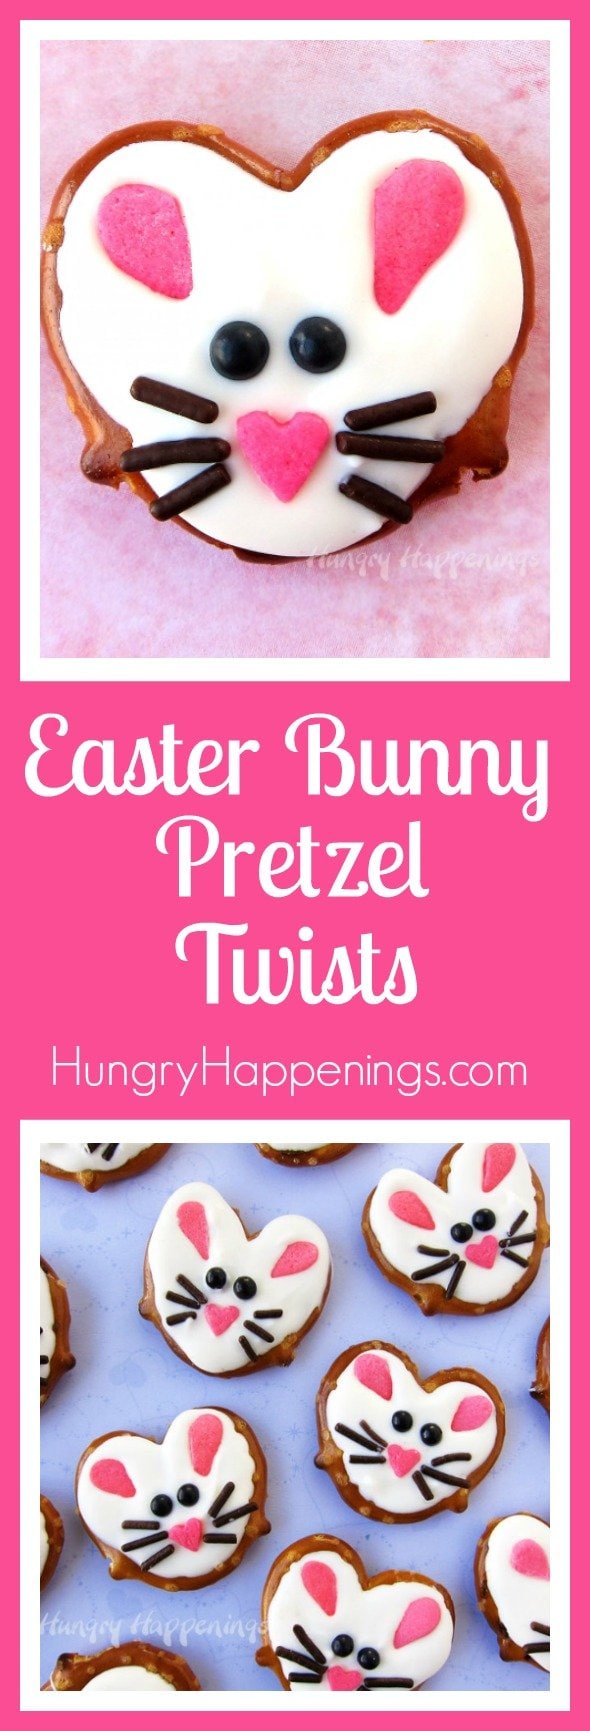 These salty and sweet Easter Bunny Pretzel Twists are so darn cute and easy to make using heart shapes sprinkles, chocolate jimmies, and black candy pearls. These cute treats are perfect basket fillers! Stop by HungryHappenings.com to watch the video tutorial.